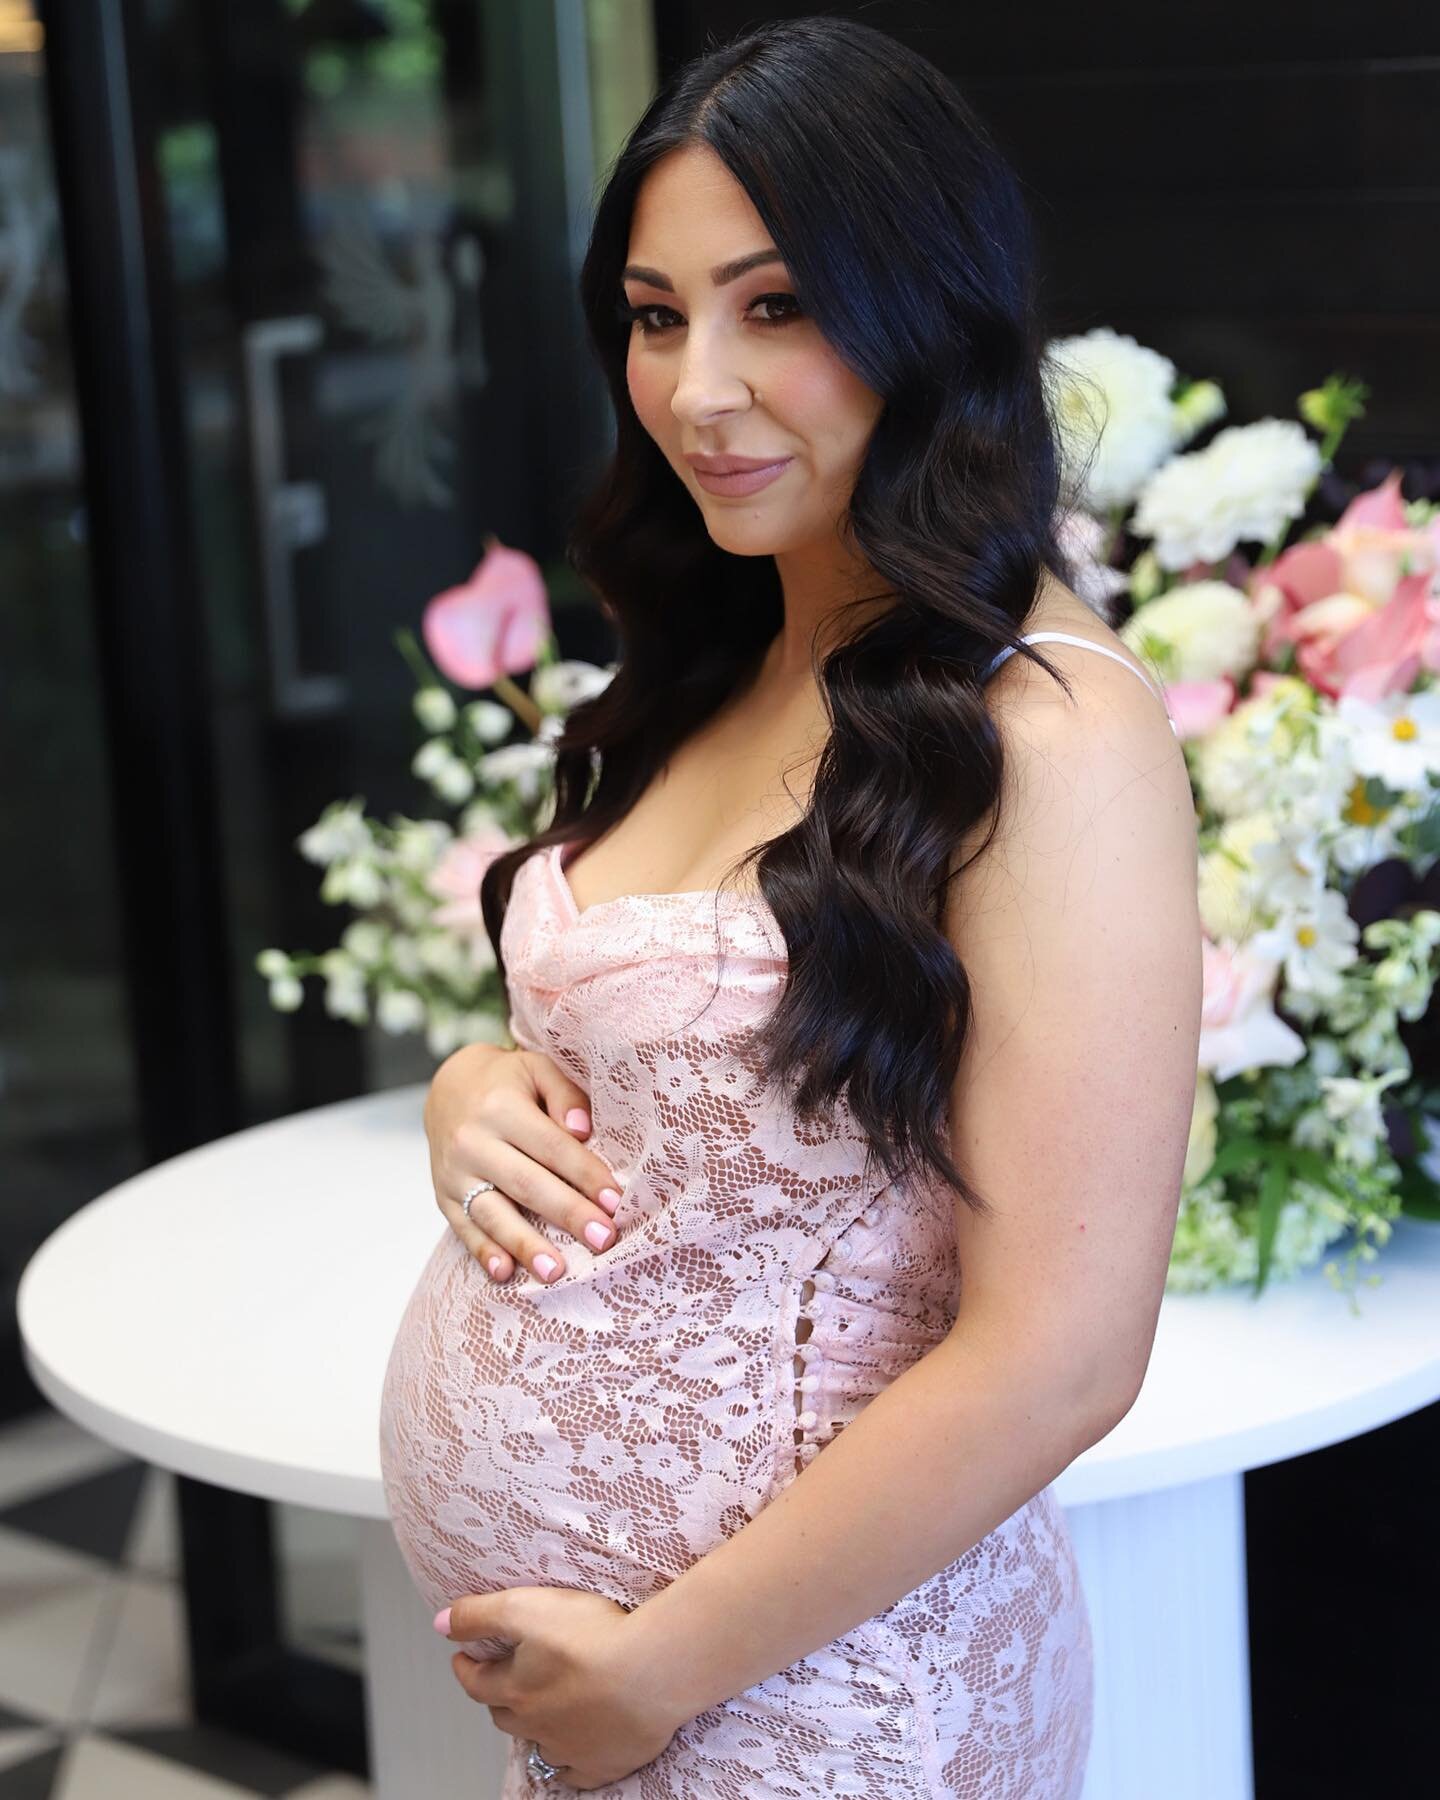 Bianca&rsquo;s baby shower! 

#baby number two is on it&rsquo;s way. Always amazing photographing for Bianca and the family. I&rsquo;ve lost count how many times it&rsquo;s been but so grateful to be part of another #celebration this weekend.

📸 @ya